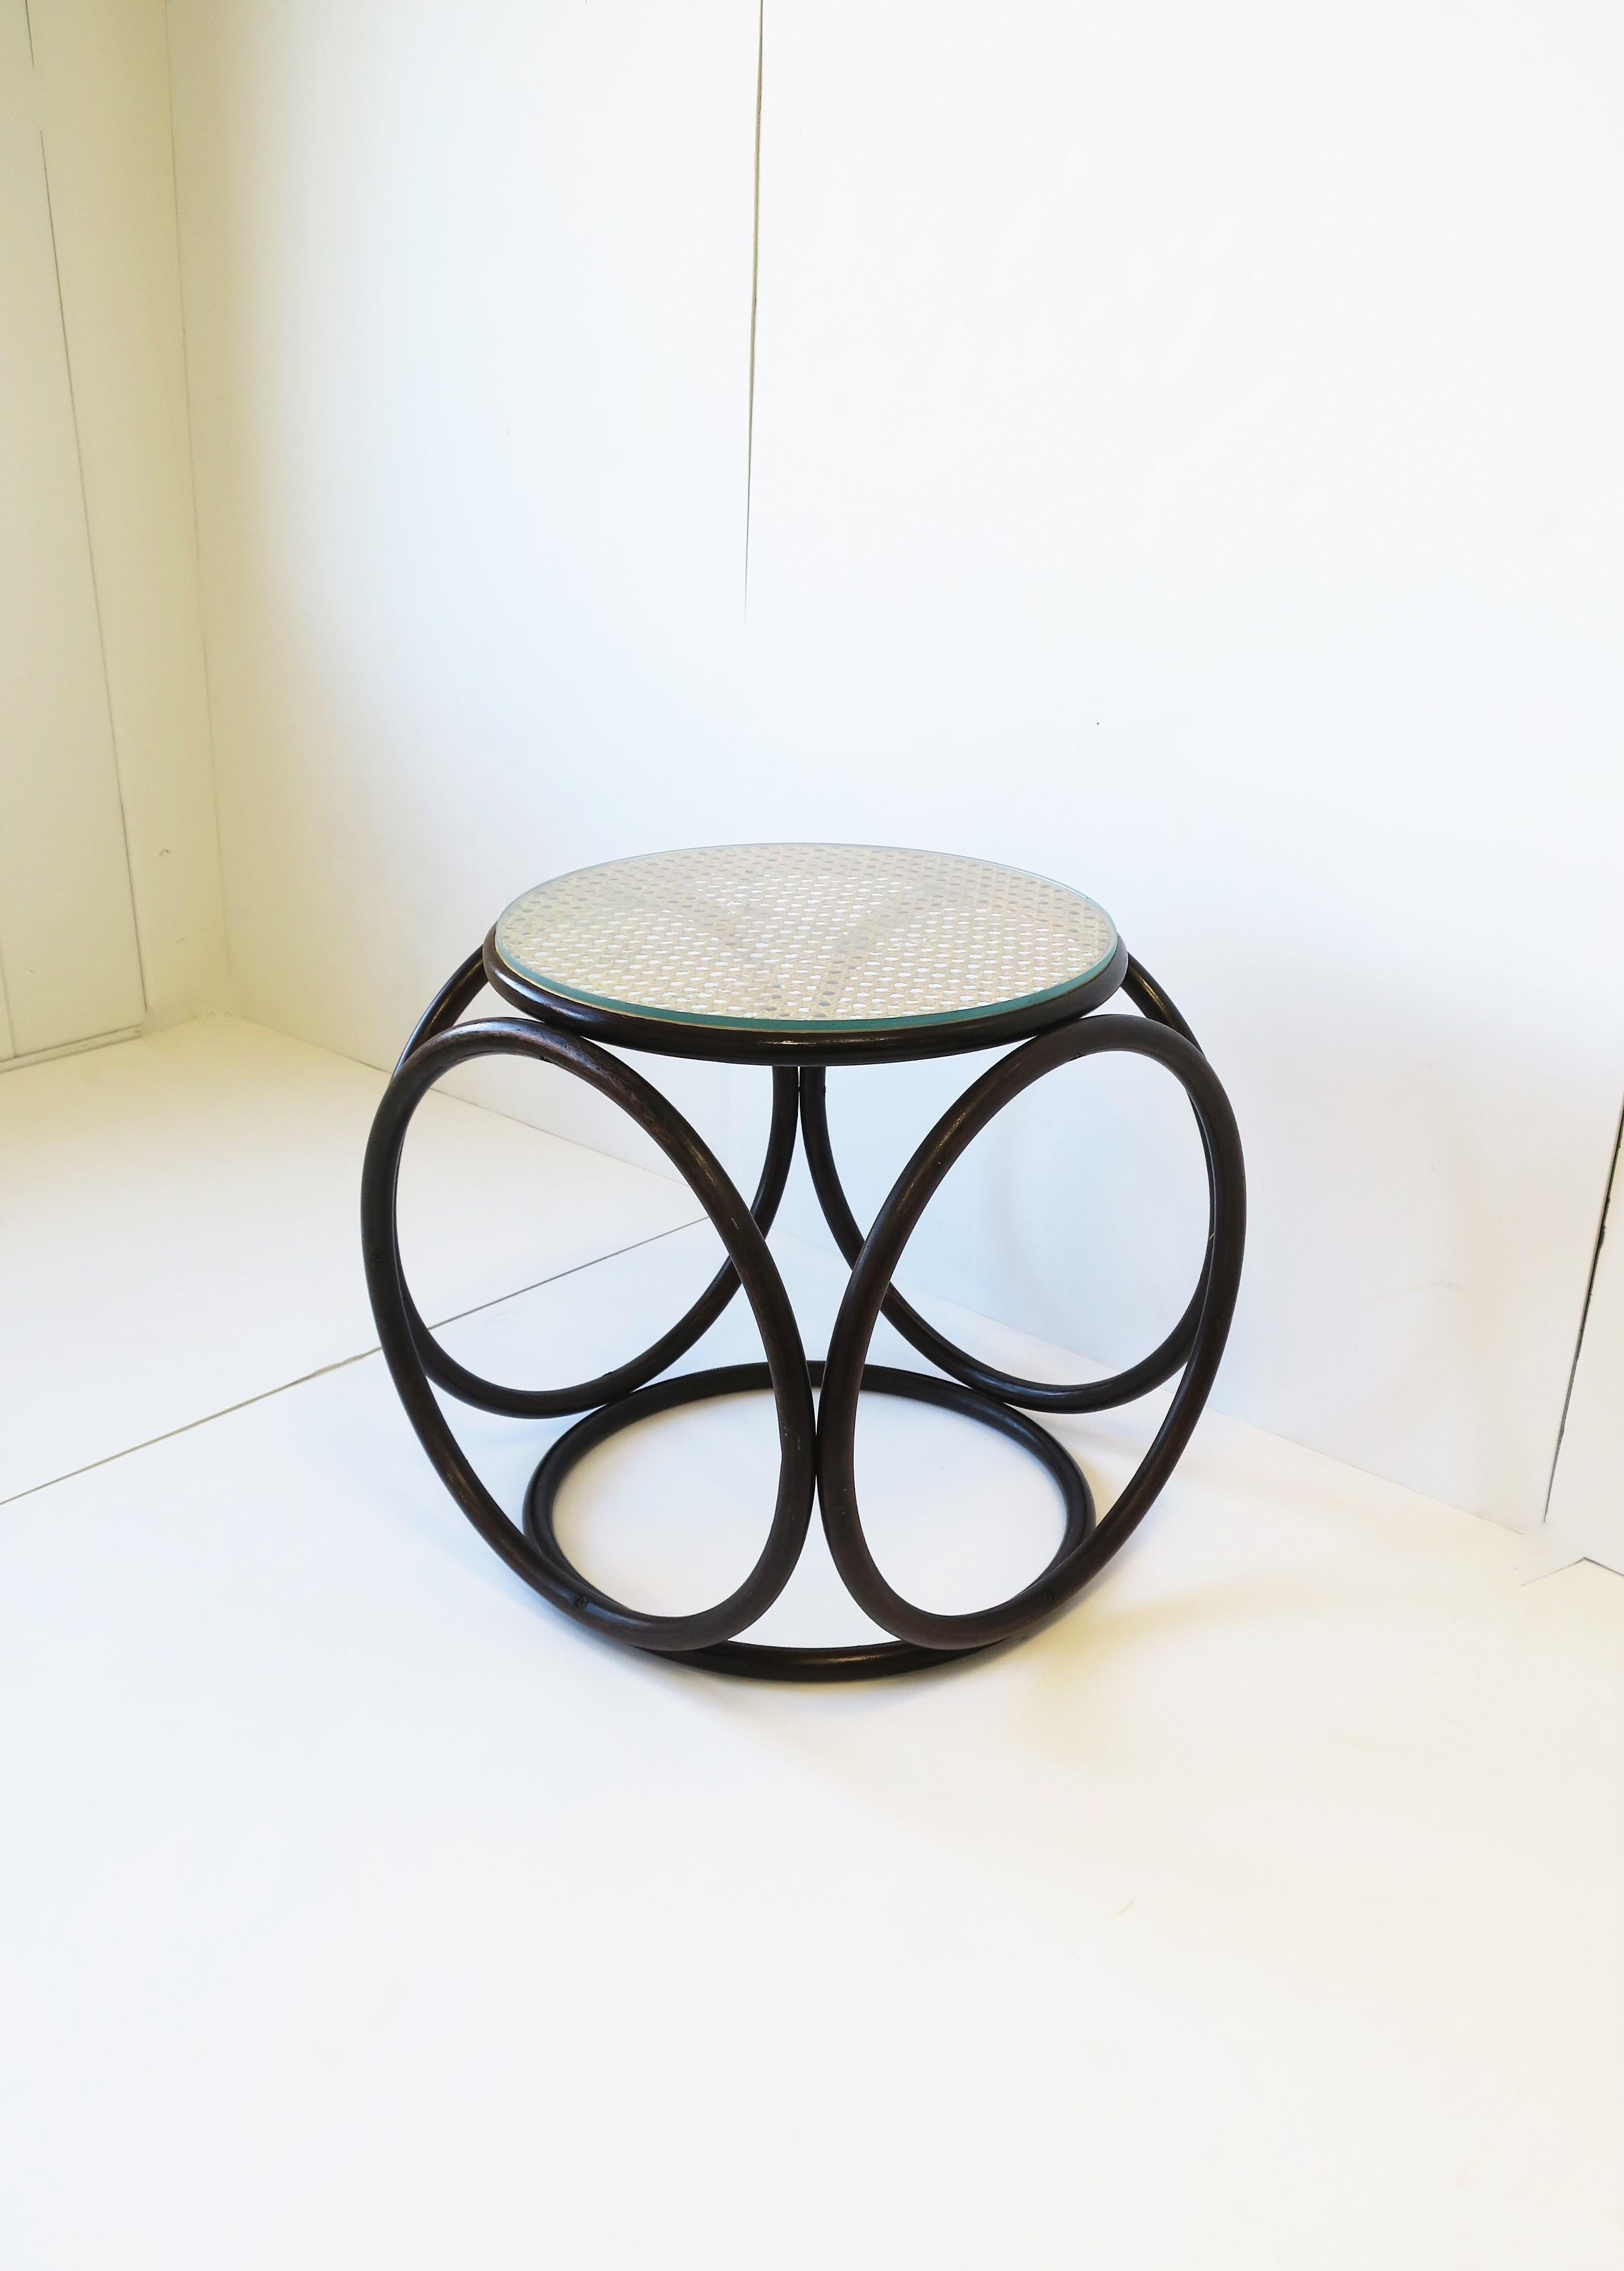 A beautiful modern bentwood, wicker cane and glass top side drinks table or stool, circa Mid-20th Century, Europe, possibly Austria. This table or stool has a beautiful rich dark bentwood, blonde cane top, and custom glass top to protect and